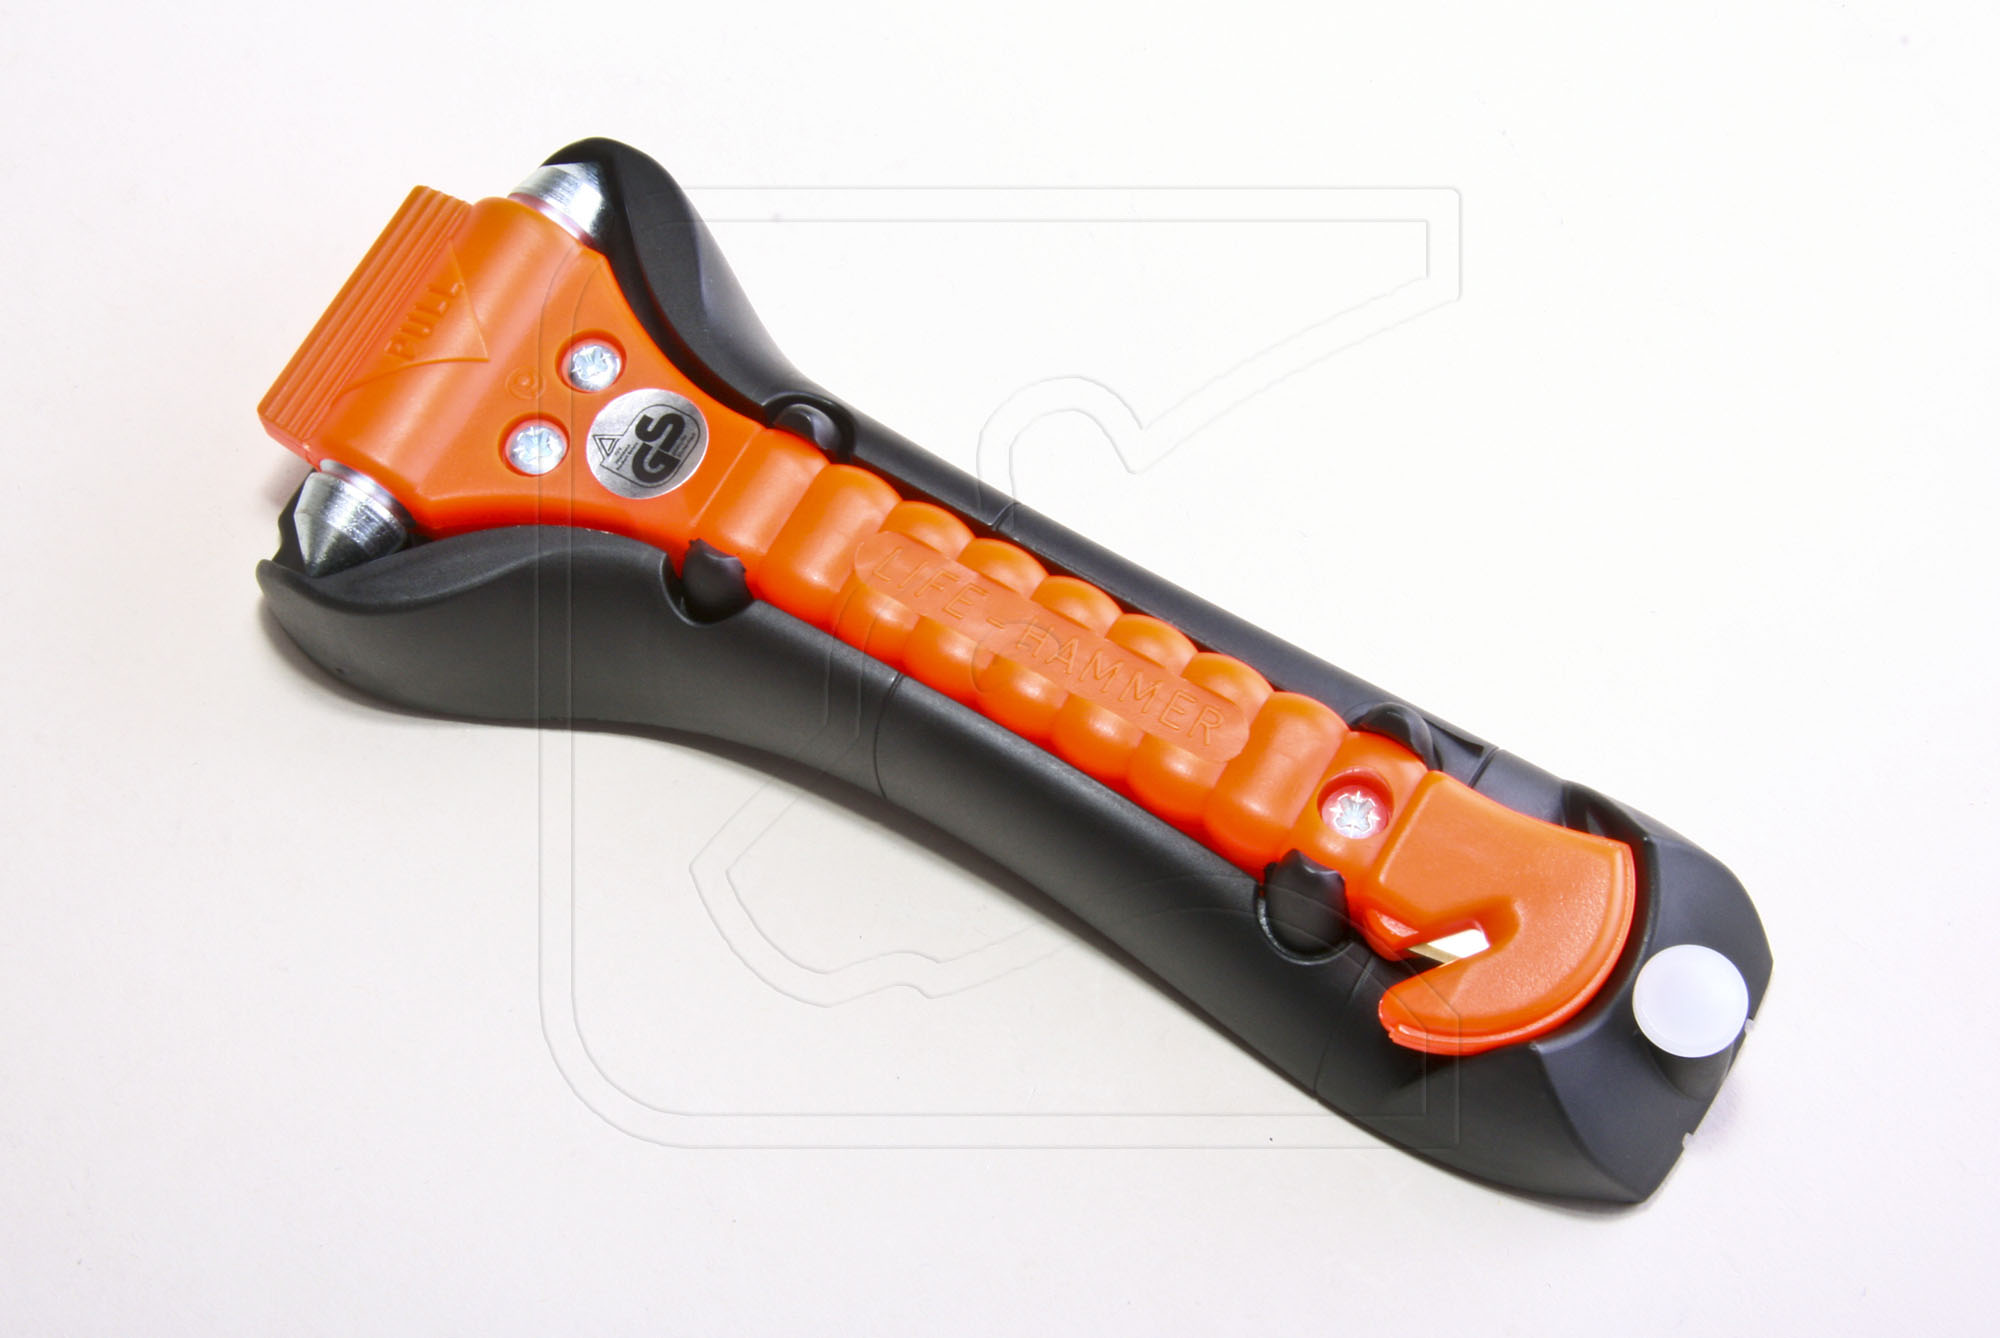 ▷ Life hammer - emergency hammer with belt cutter - available here!